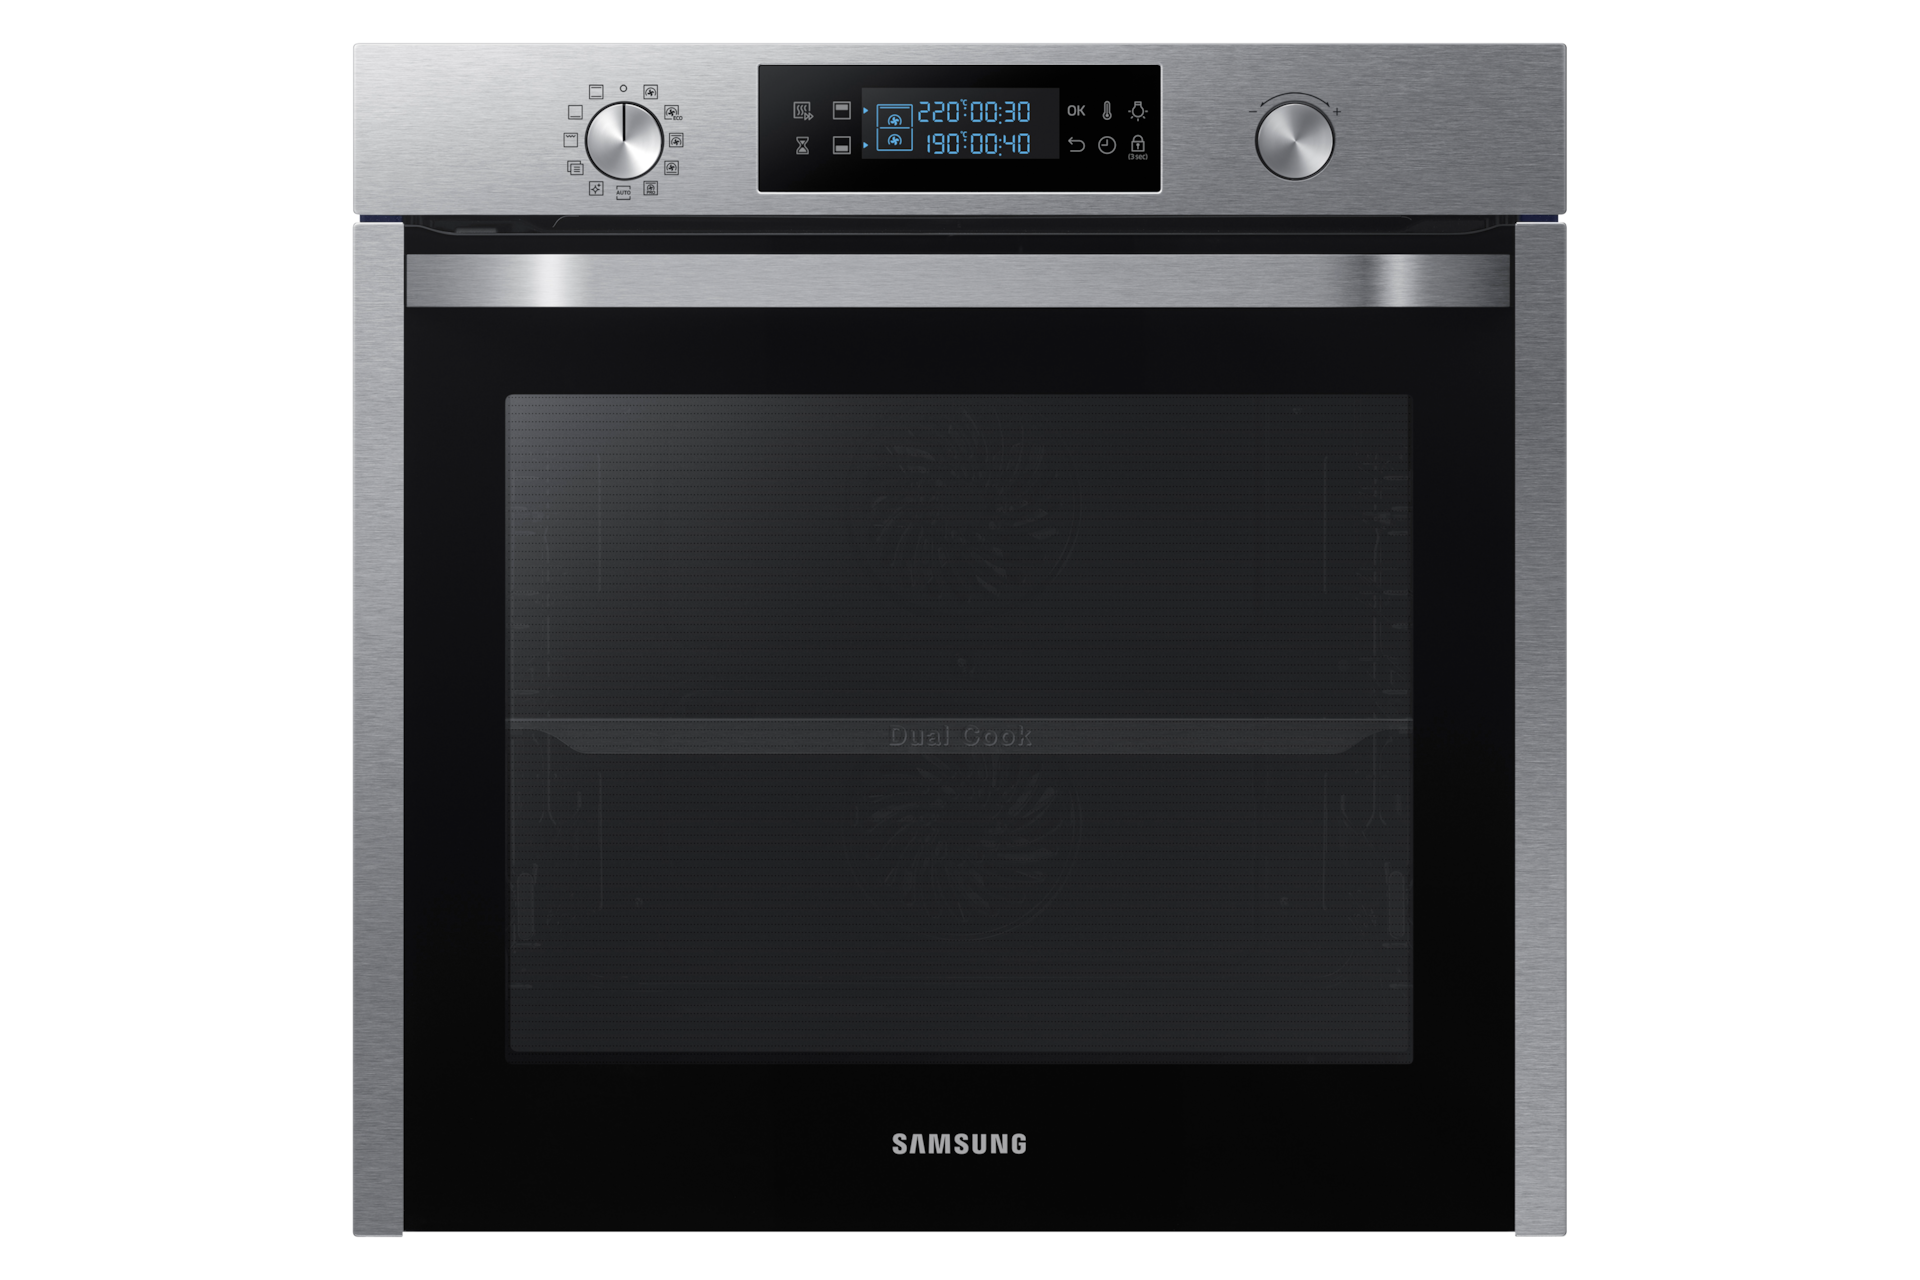 SAMSUNG Dual Cook NV75K5541 Electric Built-in Oven - Stainless Steel, Stainless Steel